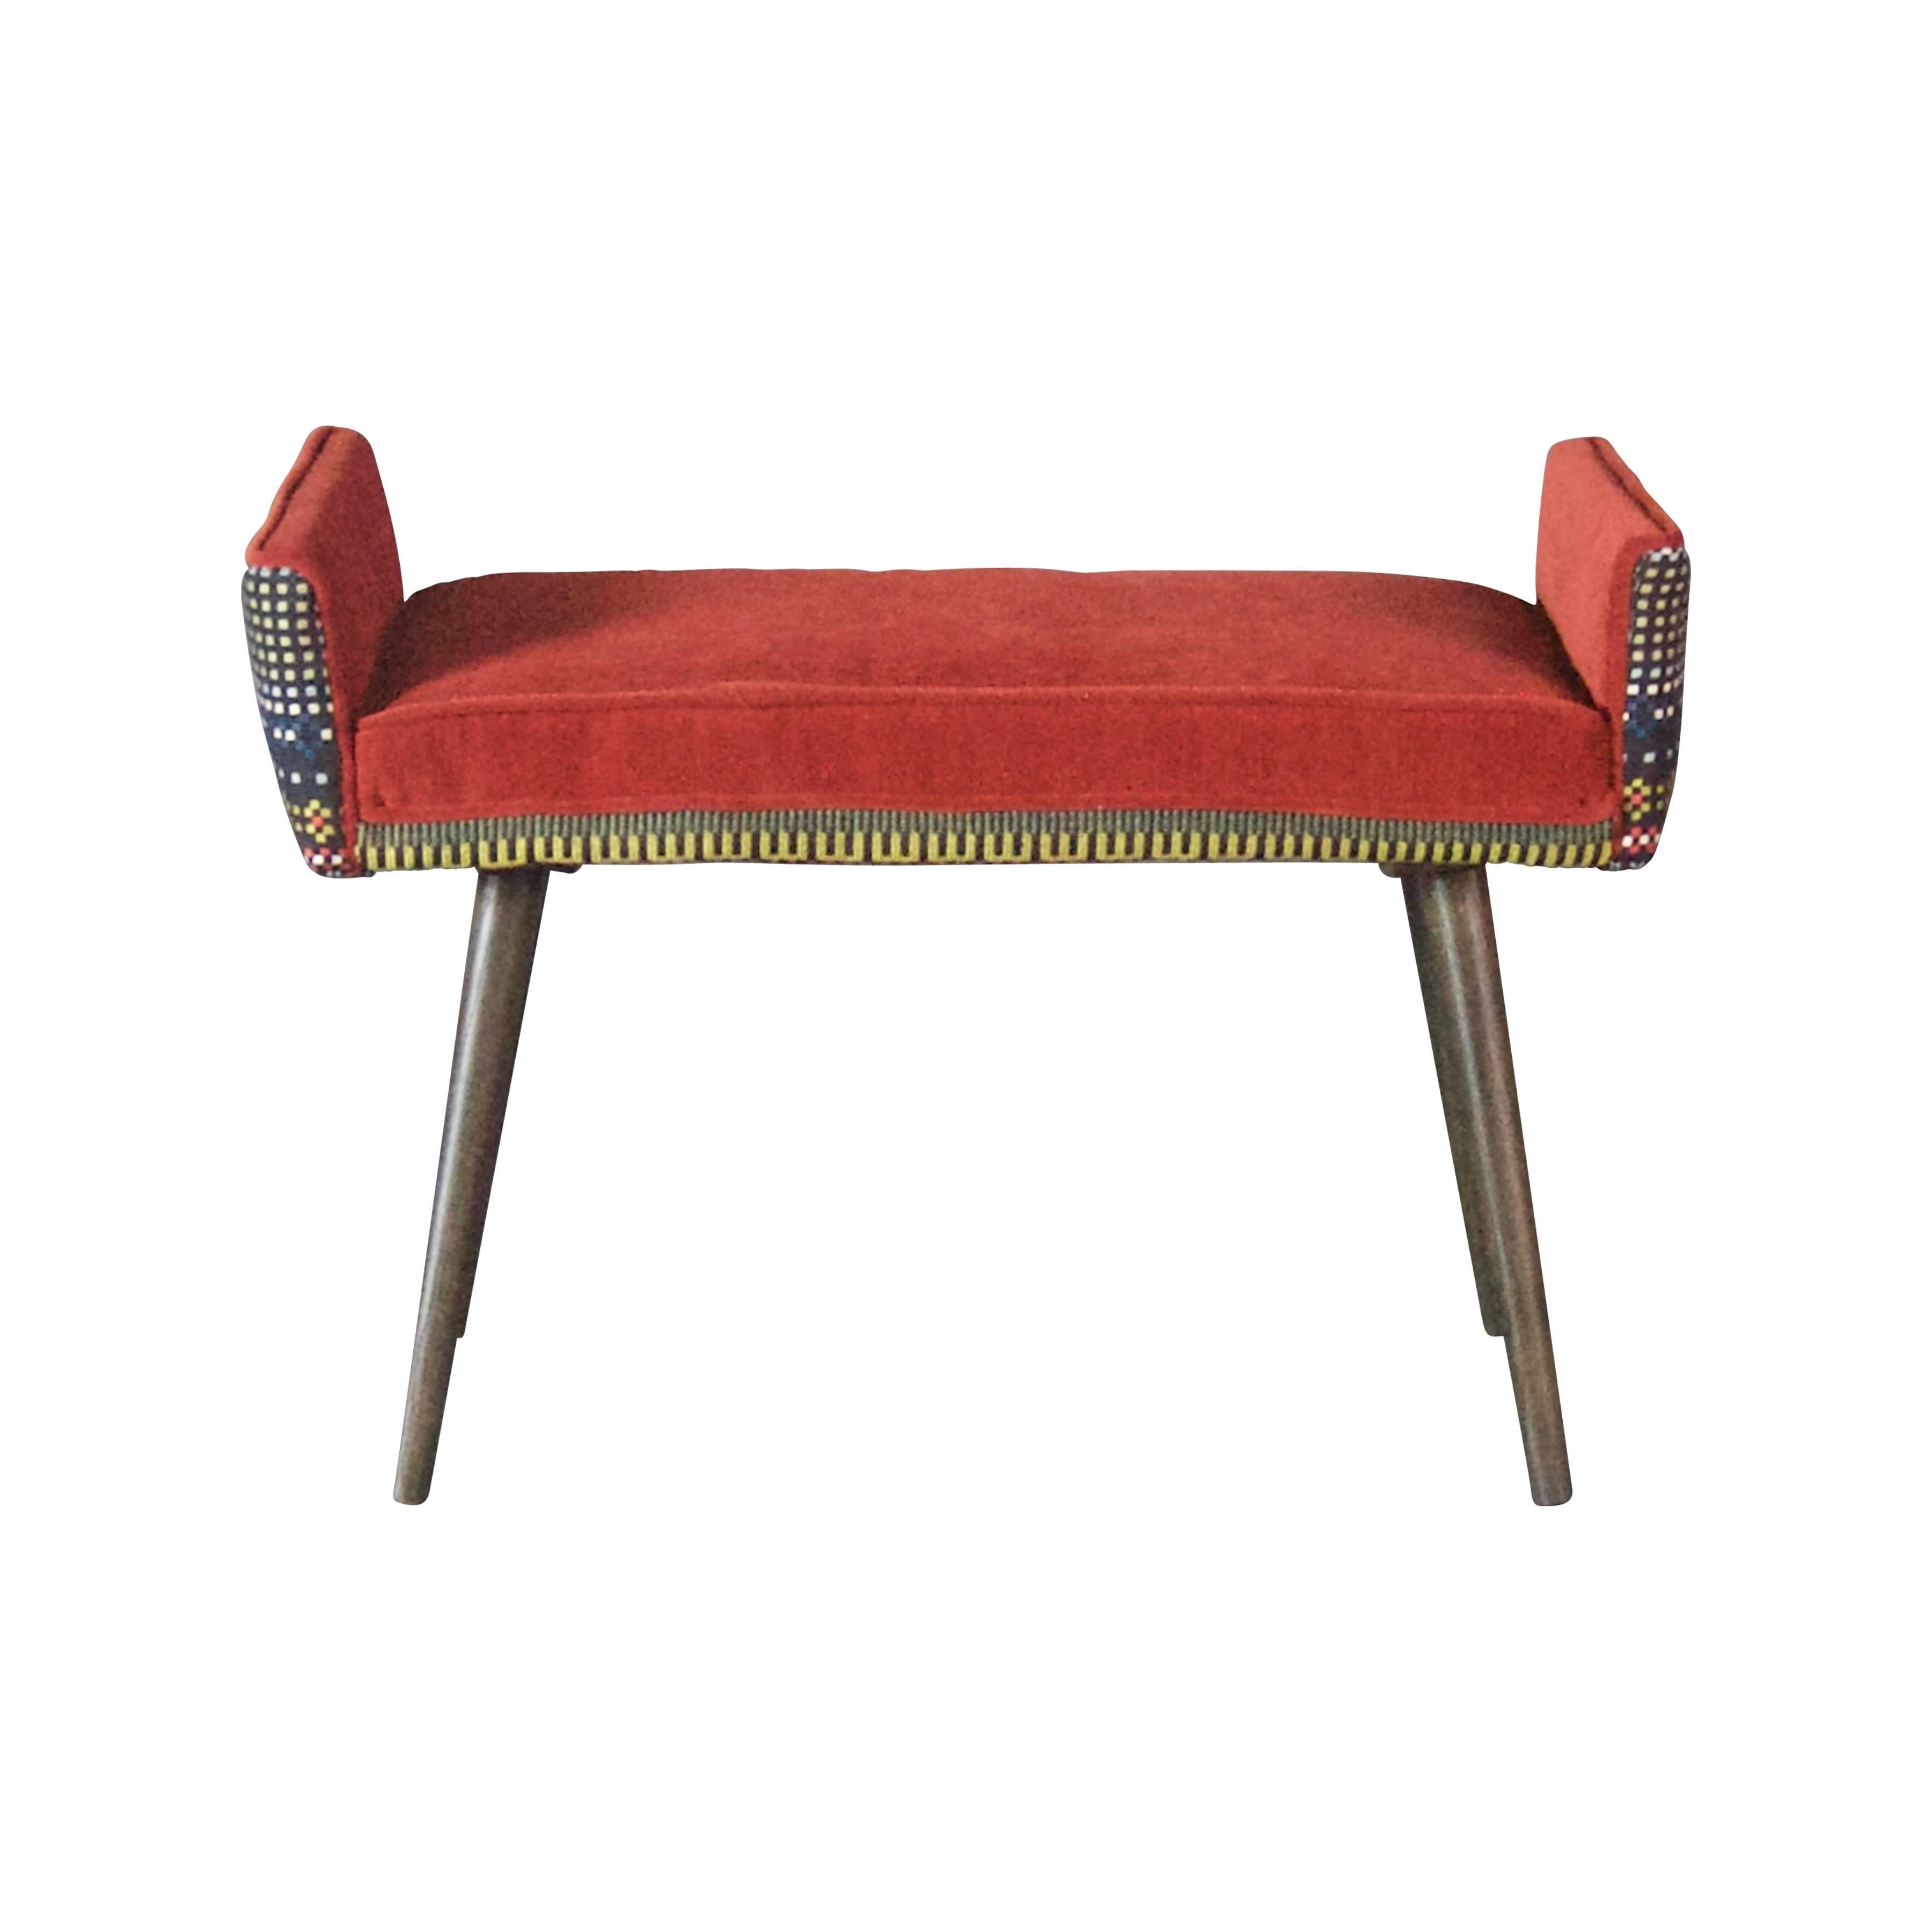 Studio Series:  Backless Vanity Size Stool in Folklorica with Flame Red Seat In Excellent Condition For Sale In Brooklyn, NY